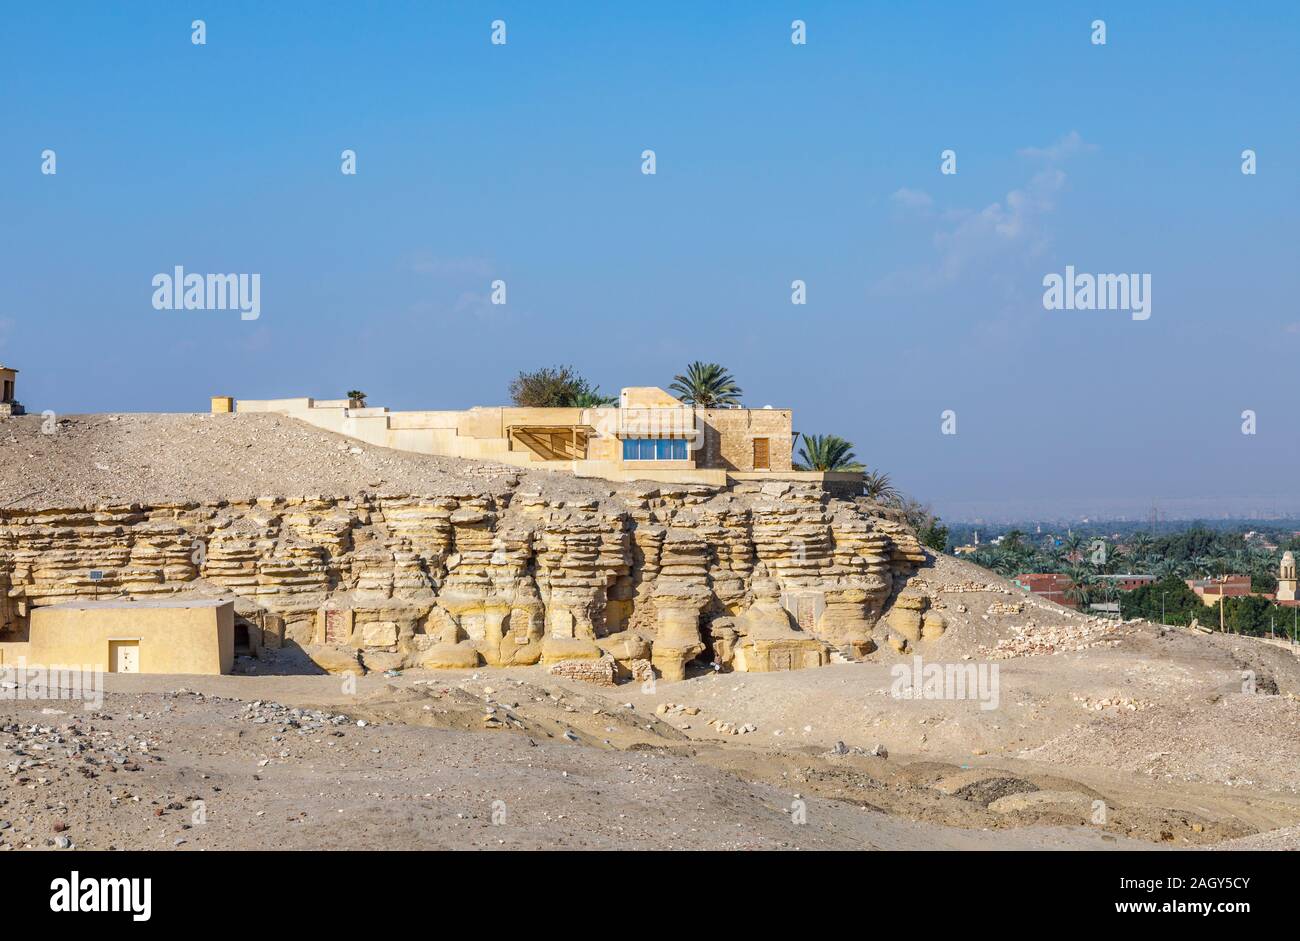 View of the exterior of the modern Imhotep Museum, an archaeological museum in the Saqqara necropolis near Memphis, outside Cairo, Egypt Stock Photo